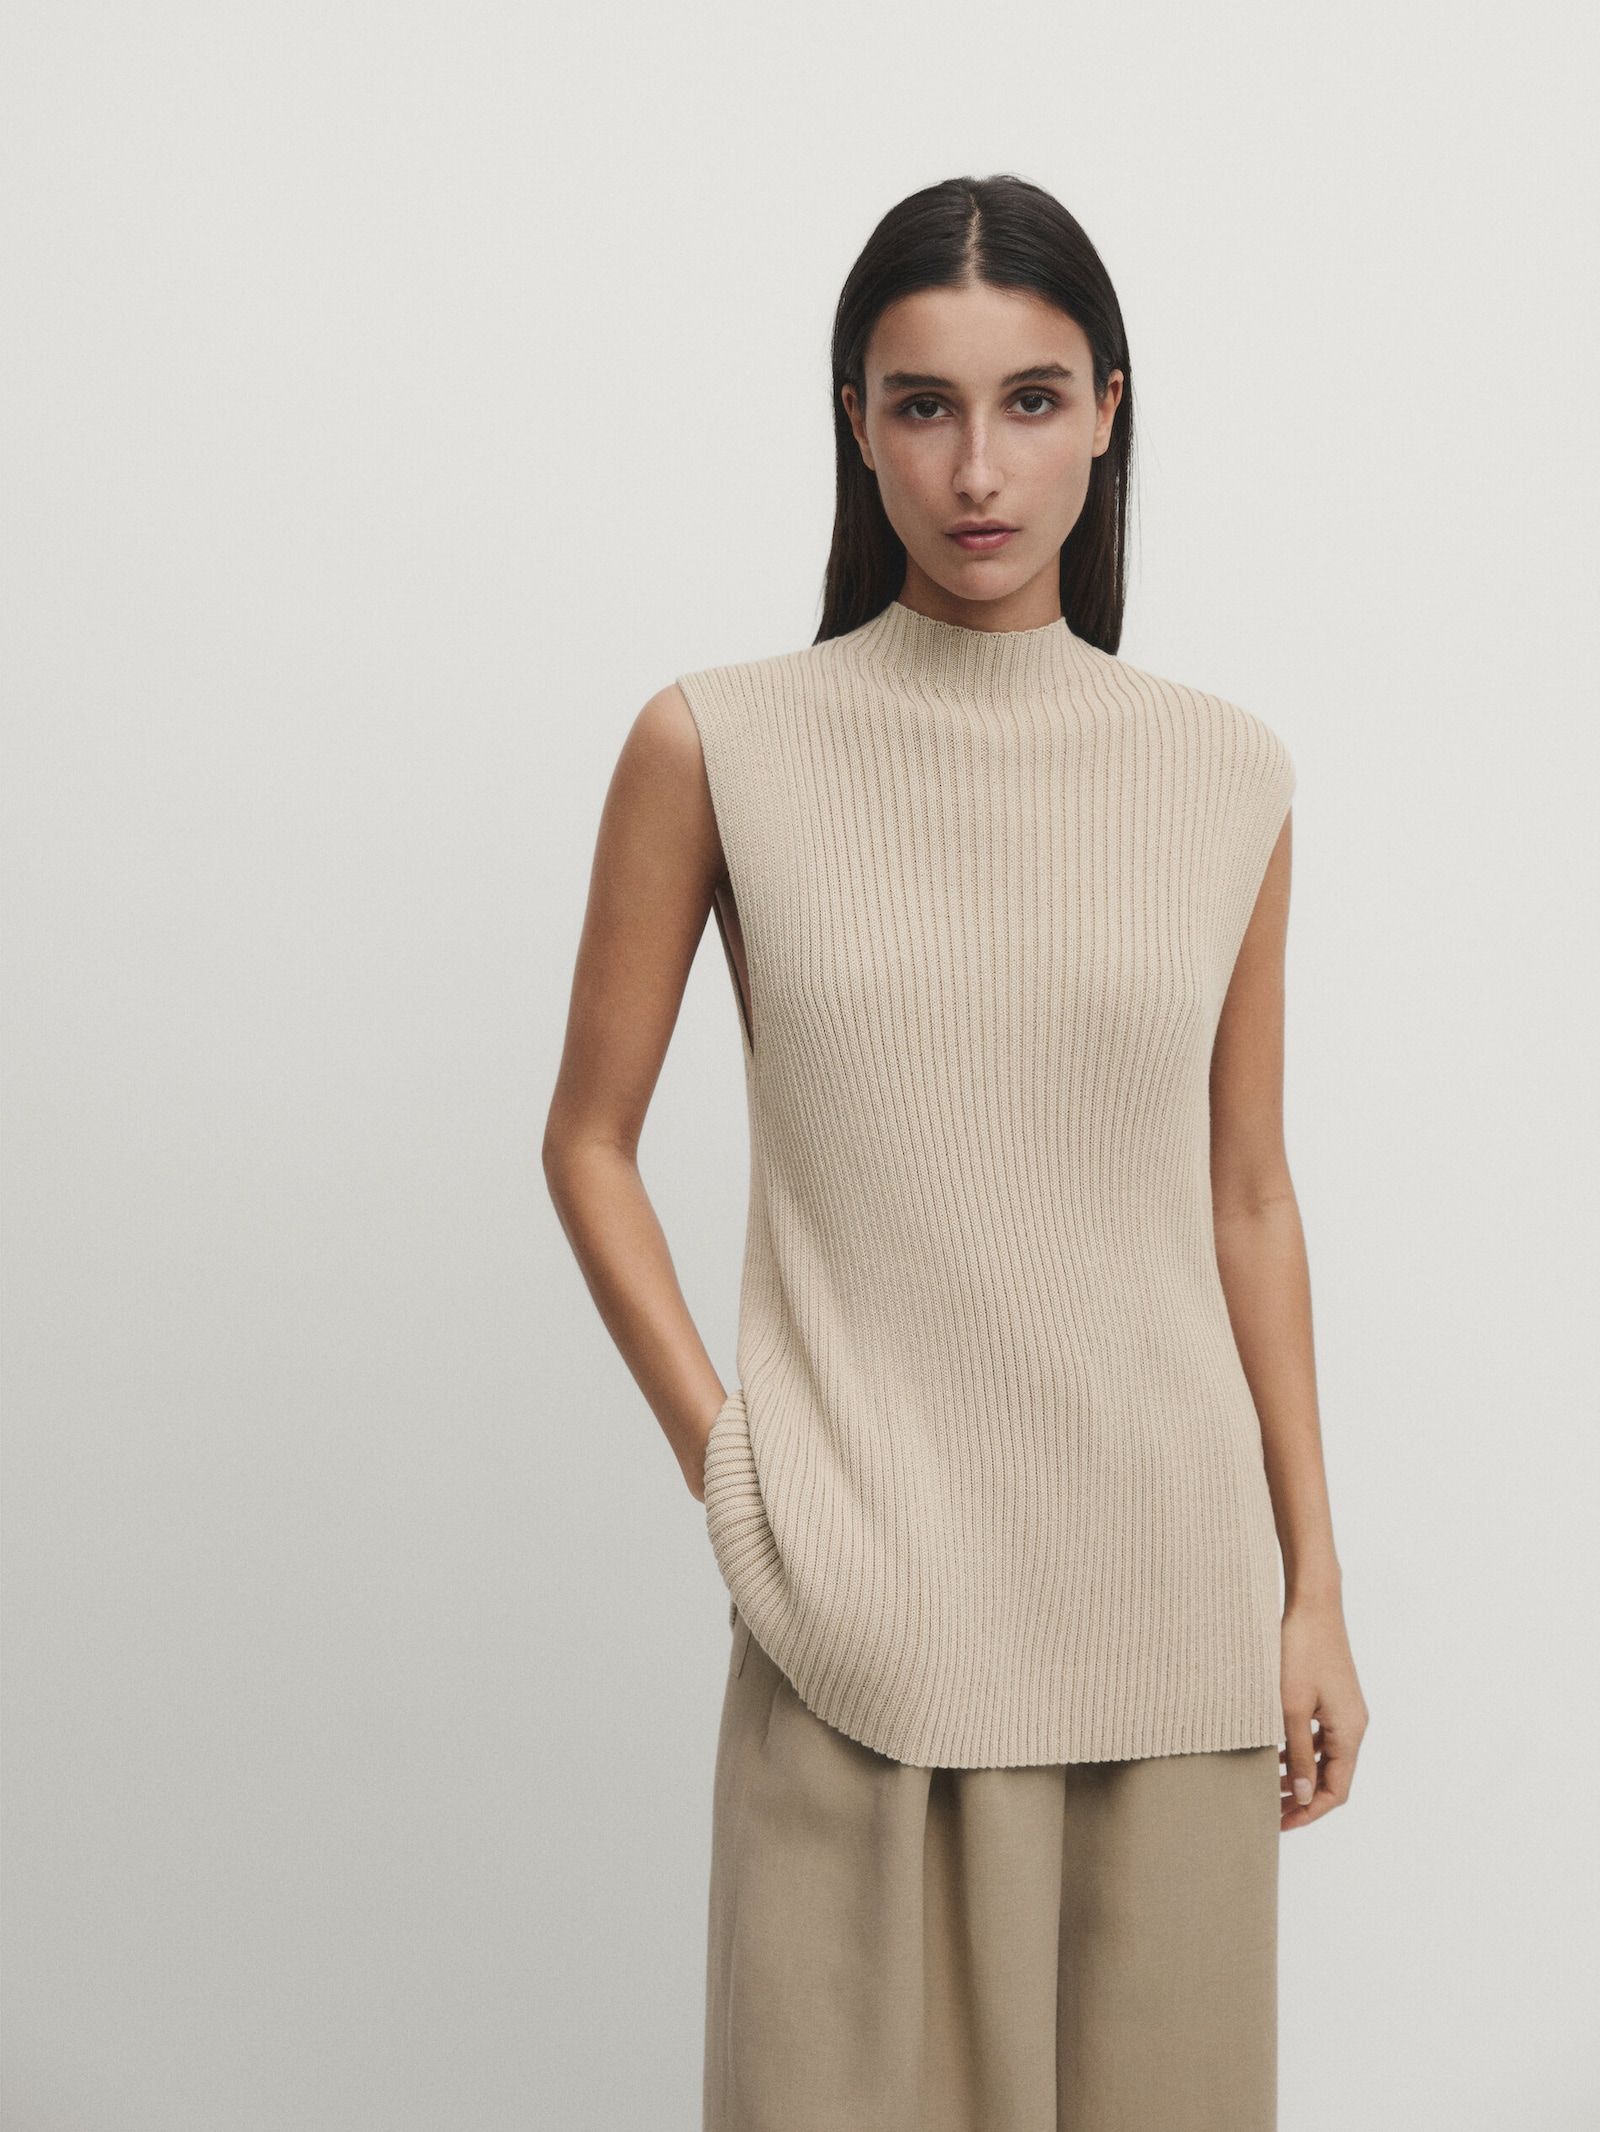 Knit top with crossover back | Massimo Dutti UK